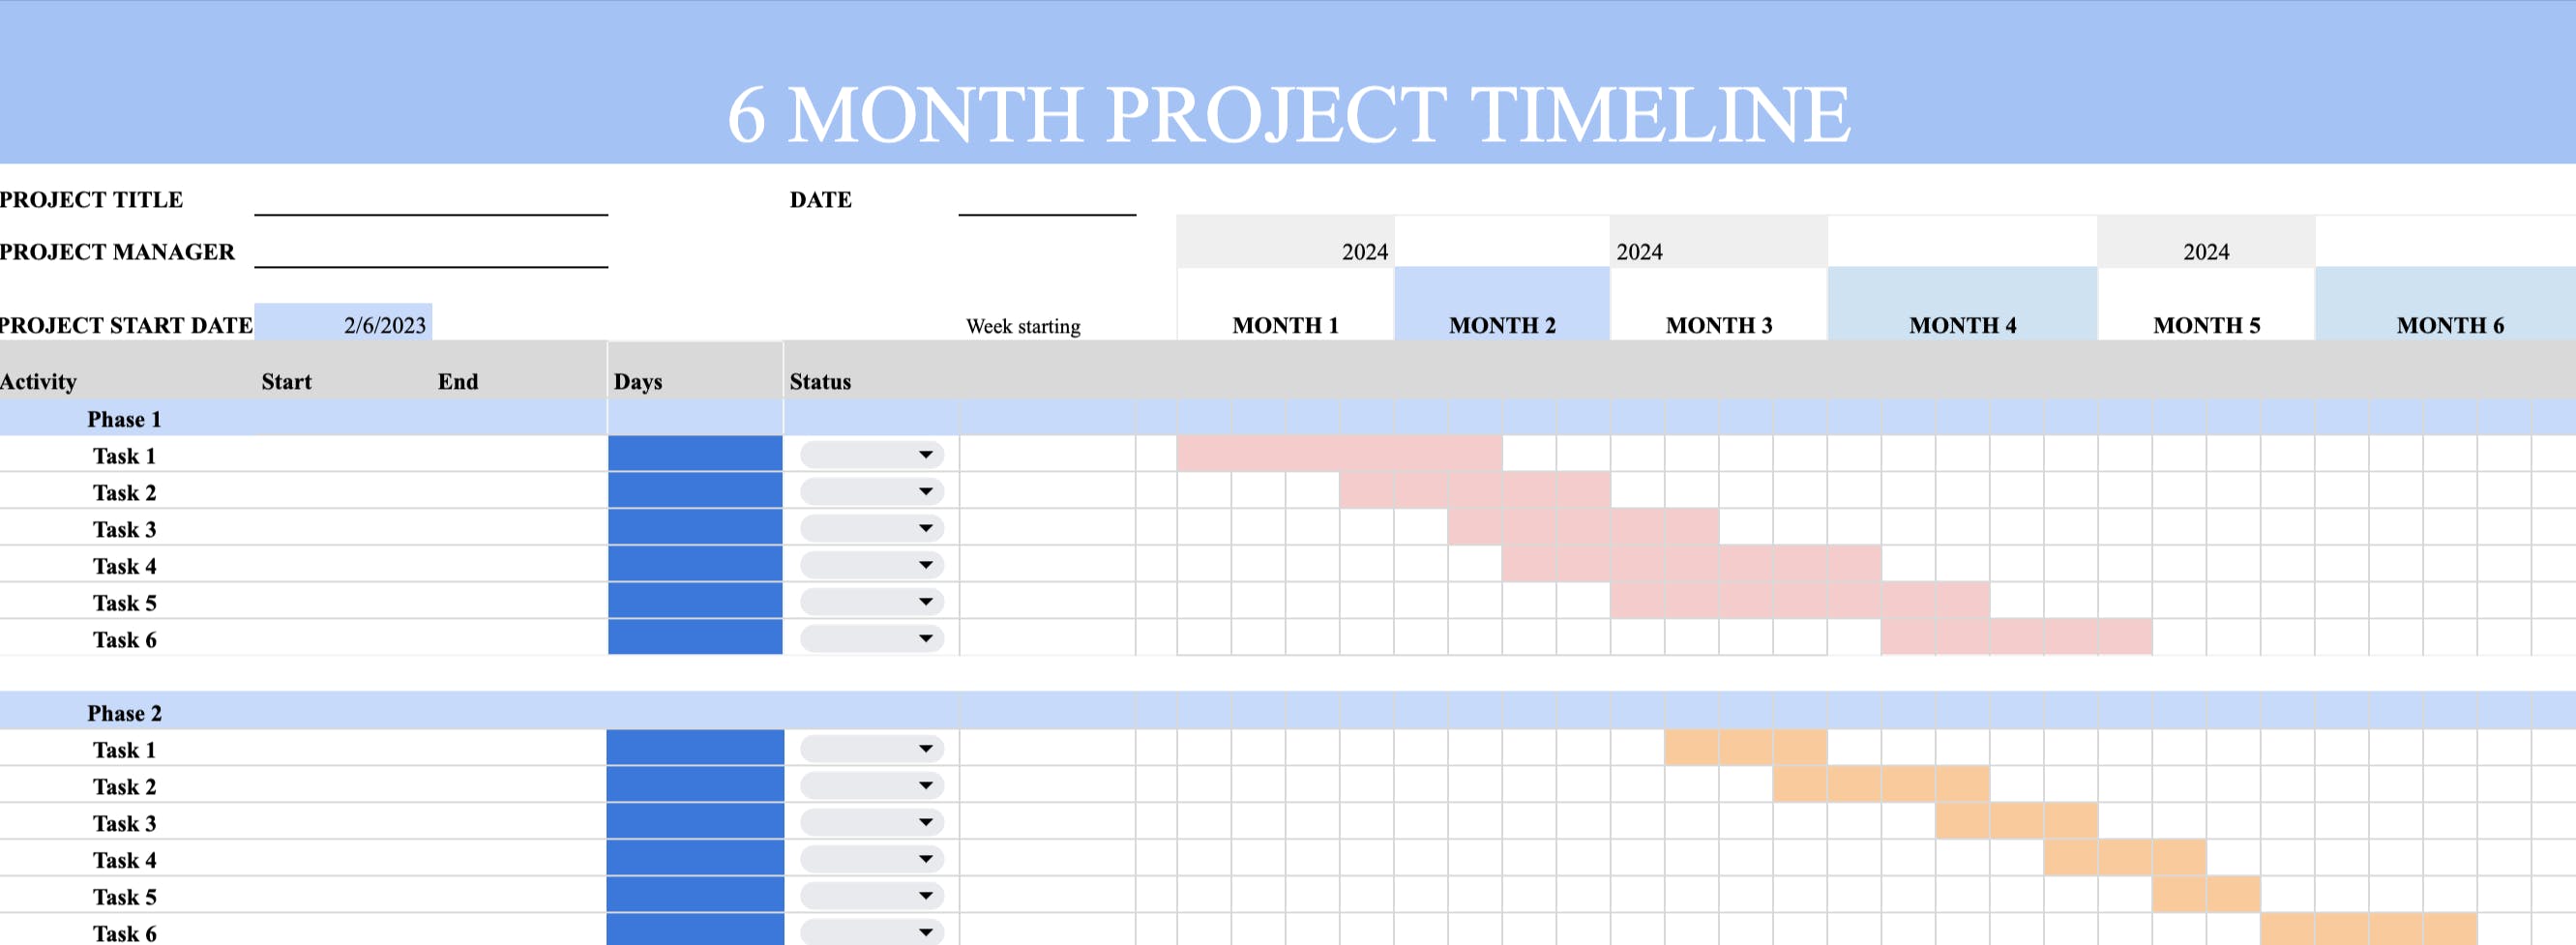 6 month project timeline template